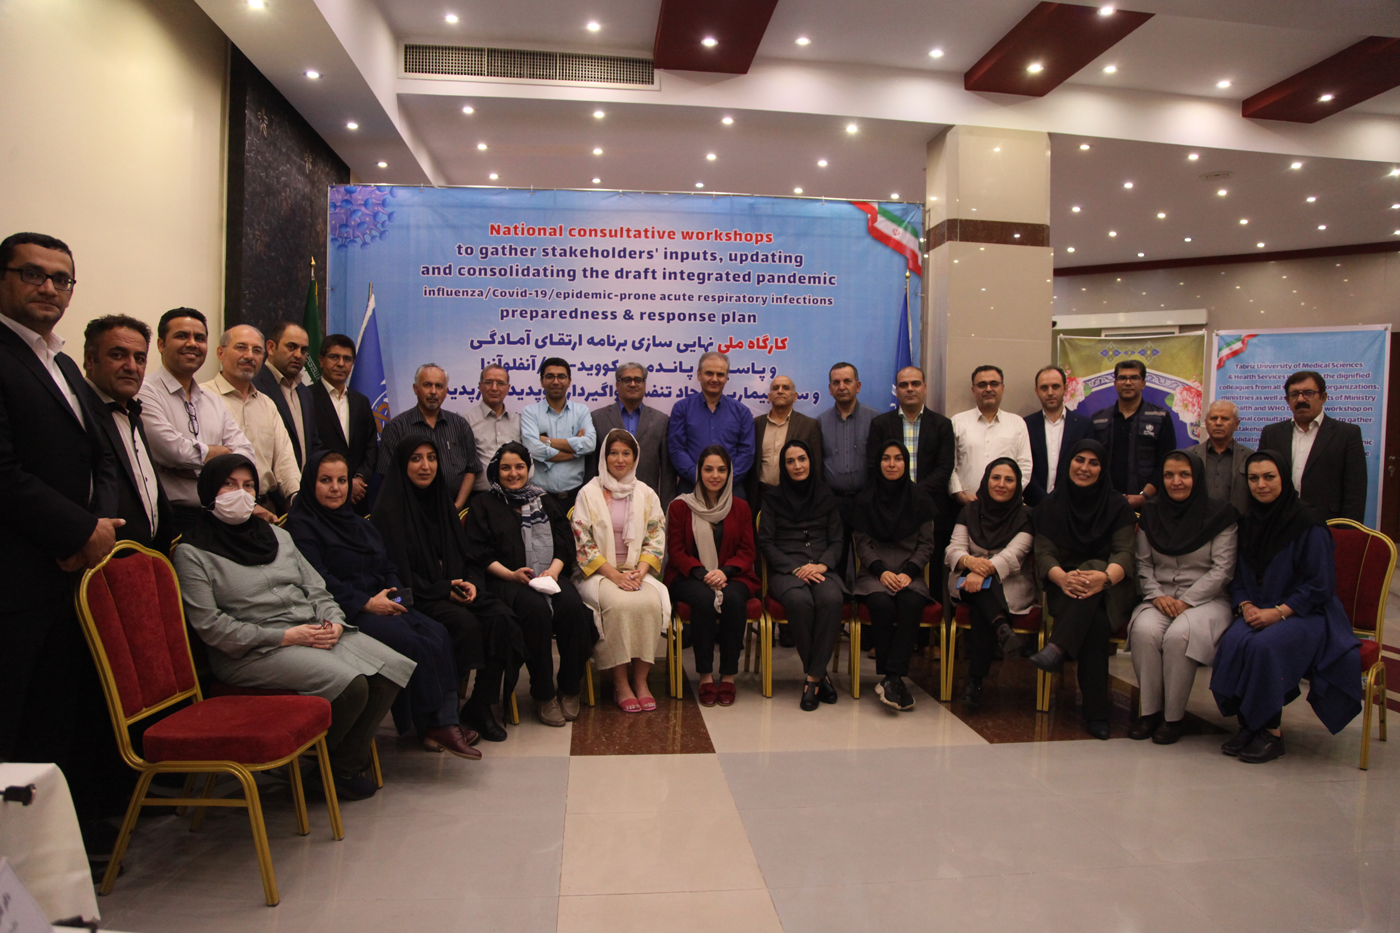 Participants-in-one-of-the-workshops-in-Tabriz-Islamic-Republic-of-Iran-